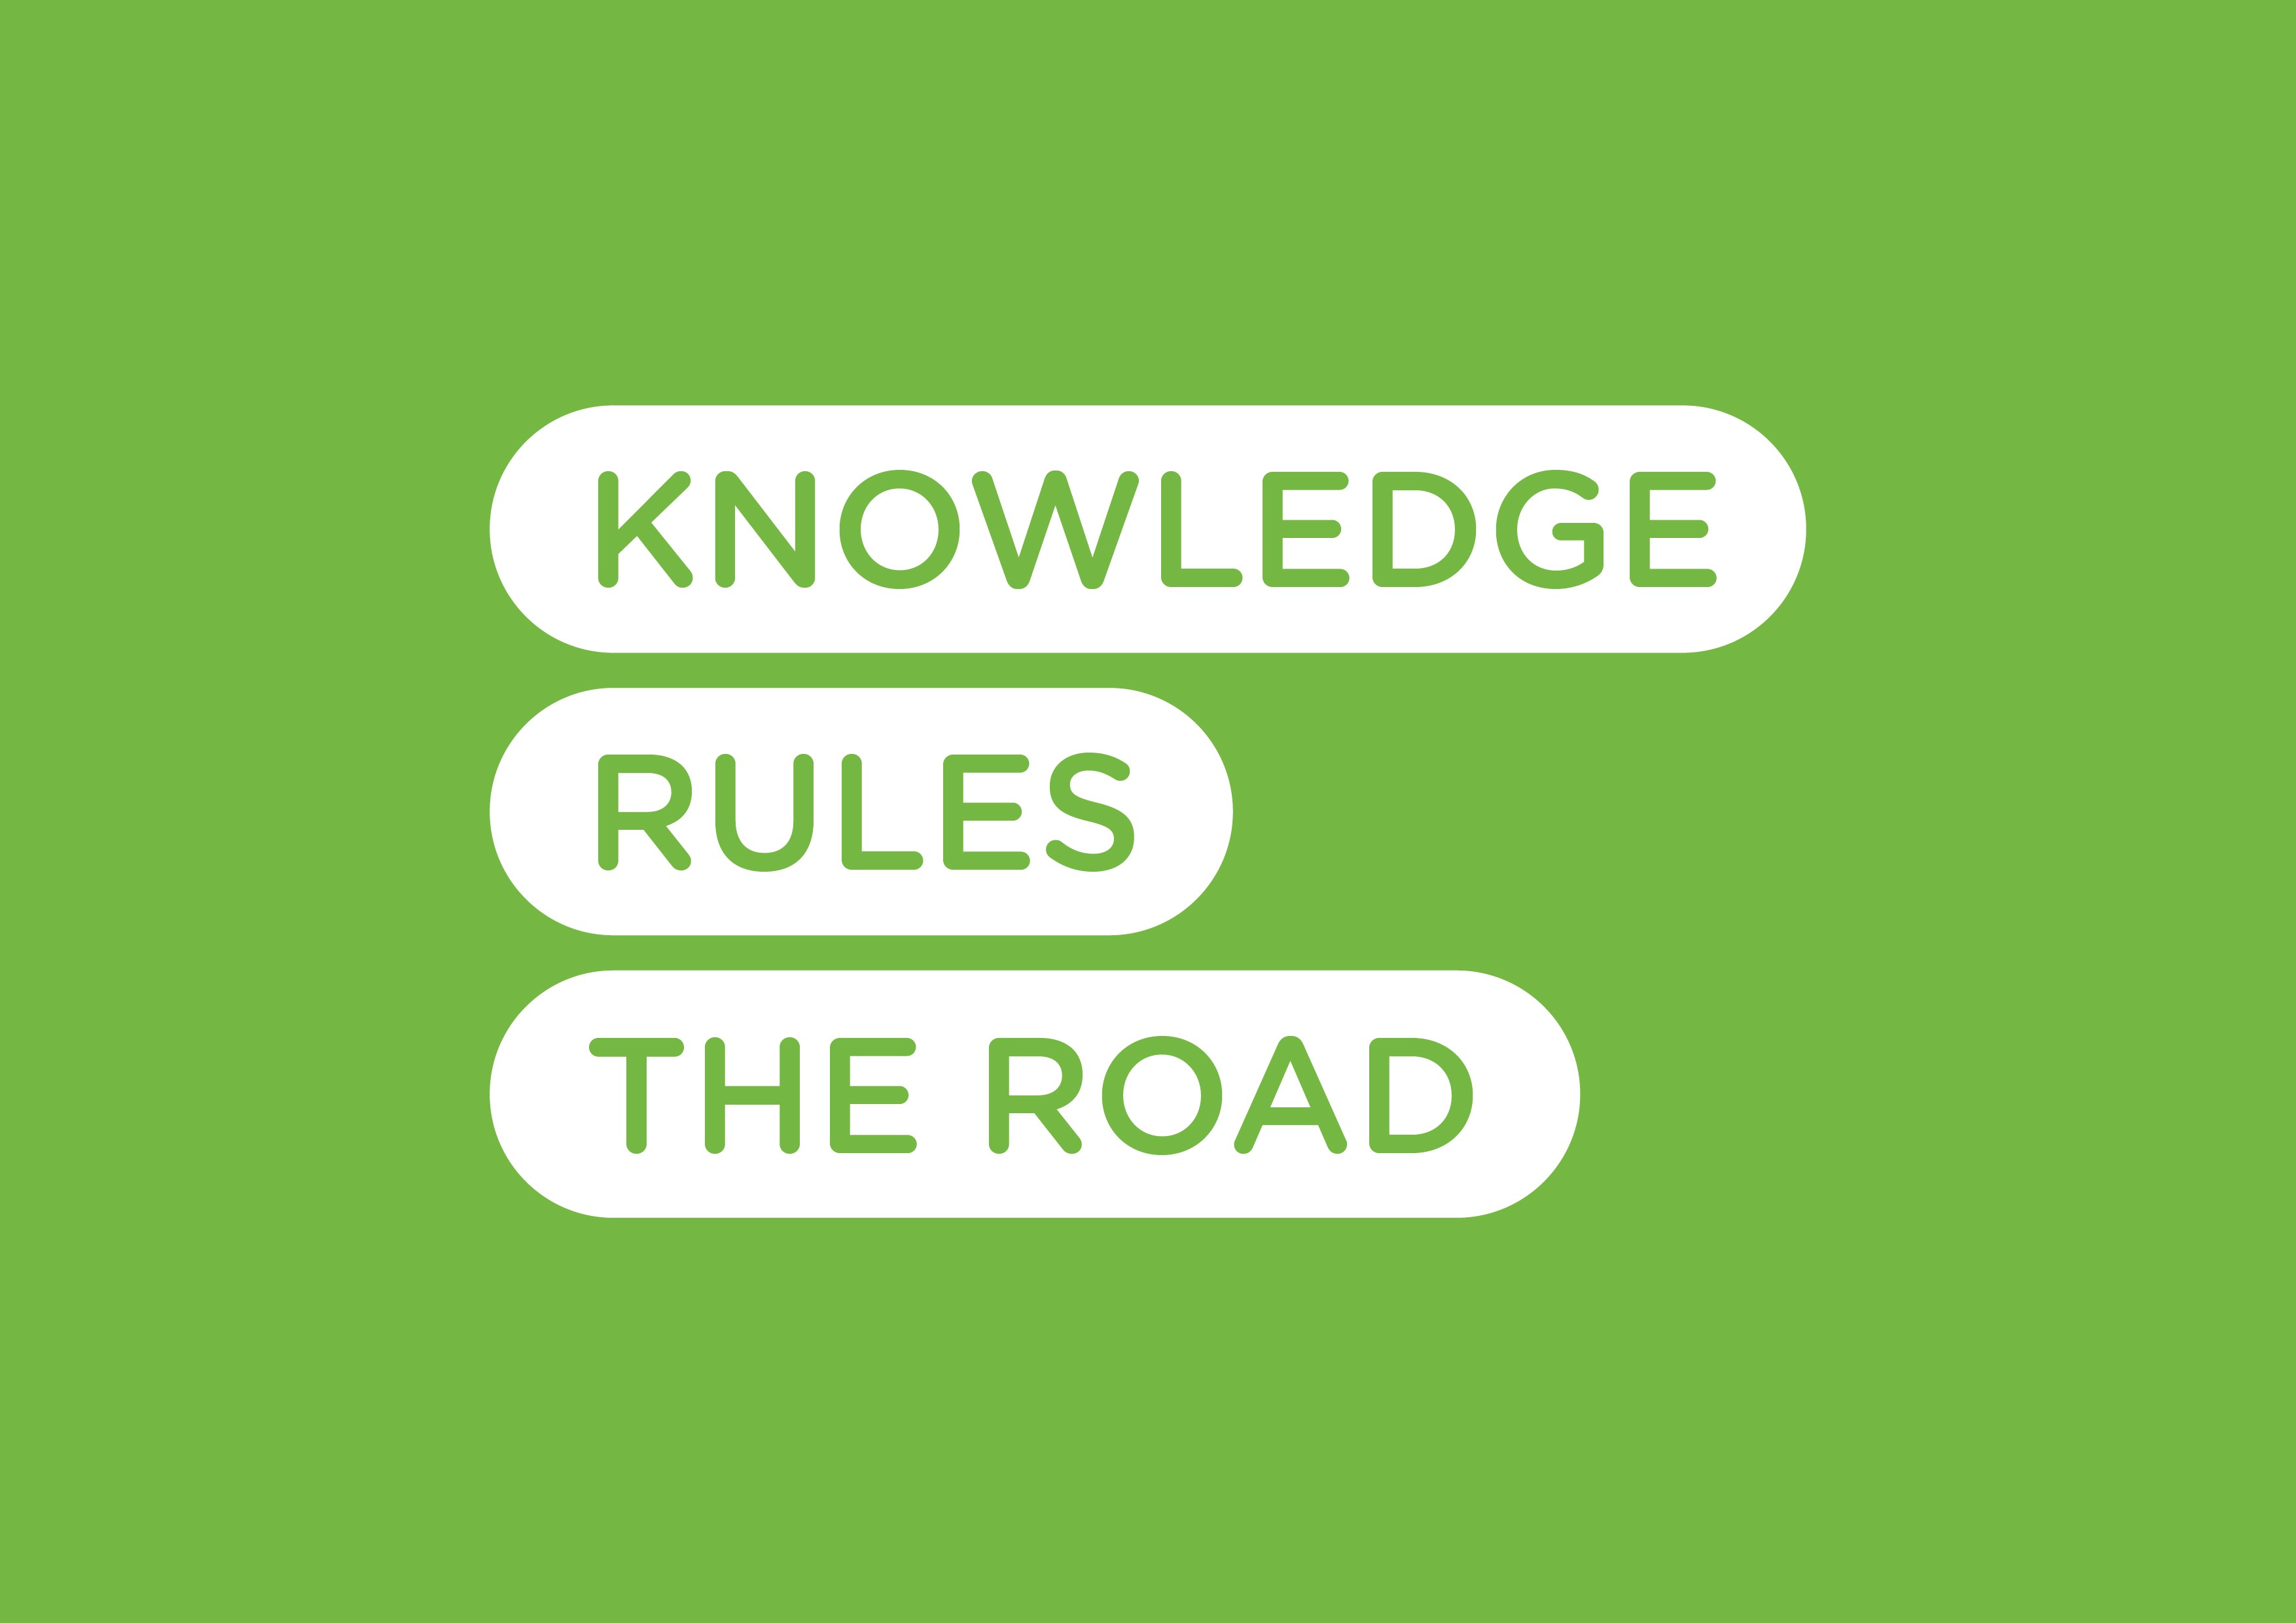 Knowledge Rules the Road